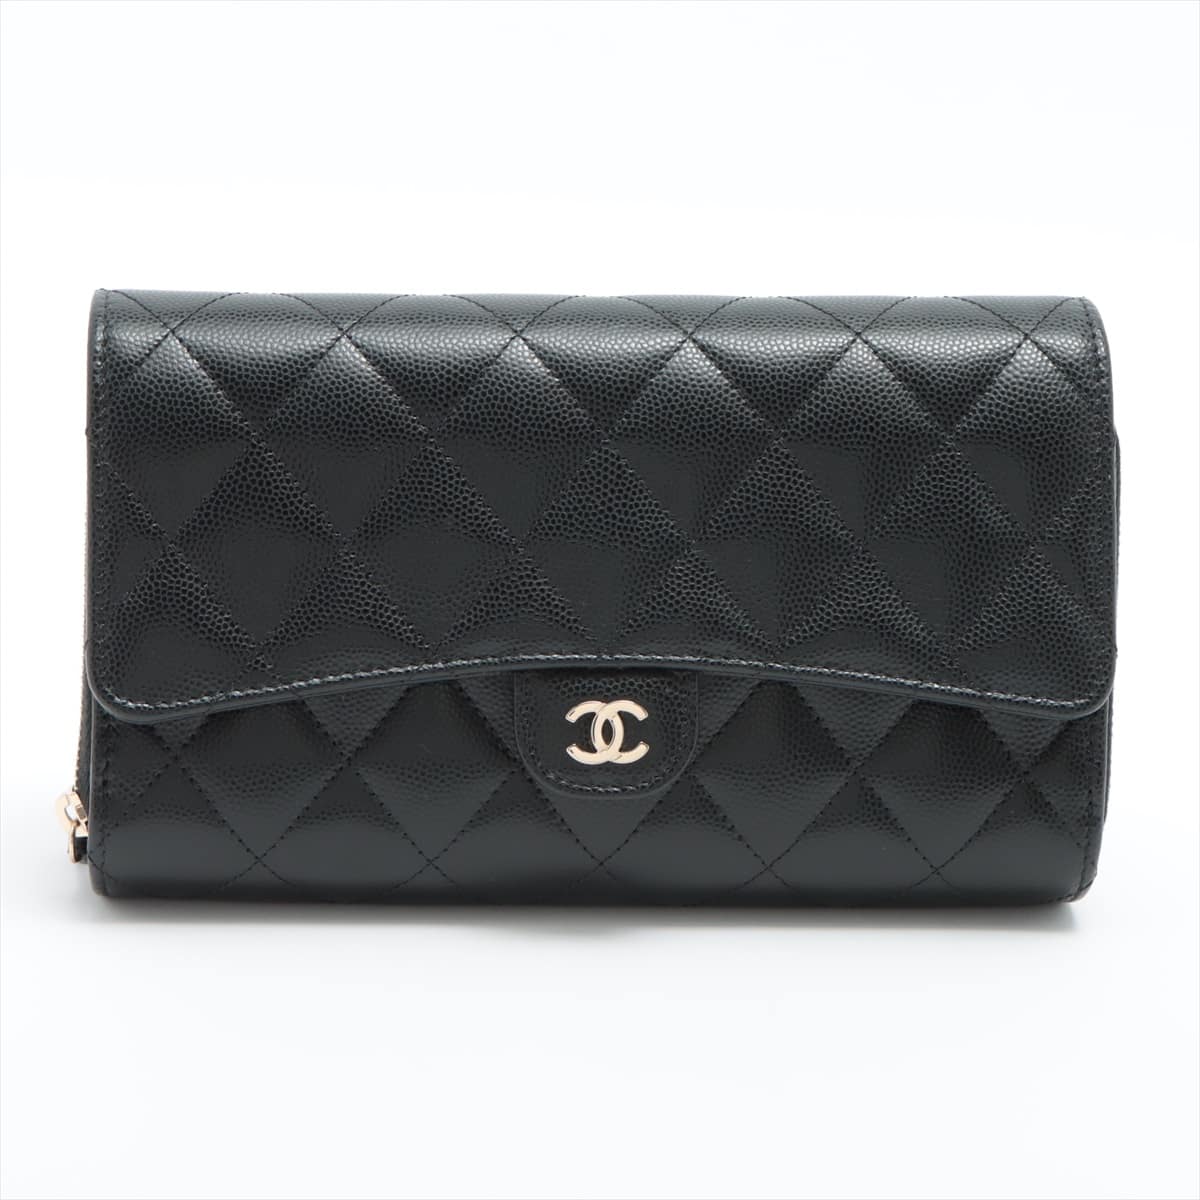 Chanel Matelasse Caviarskin Chain wallet Black Gold Metal fittings 31st with pouch